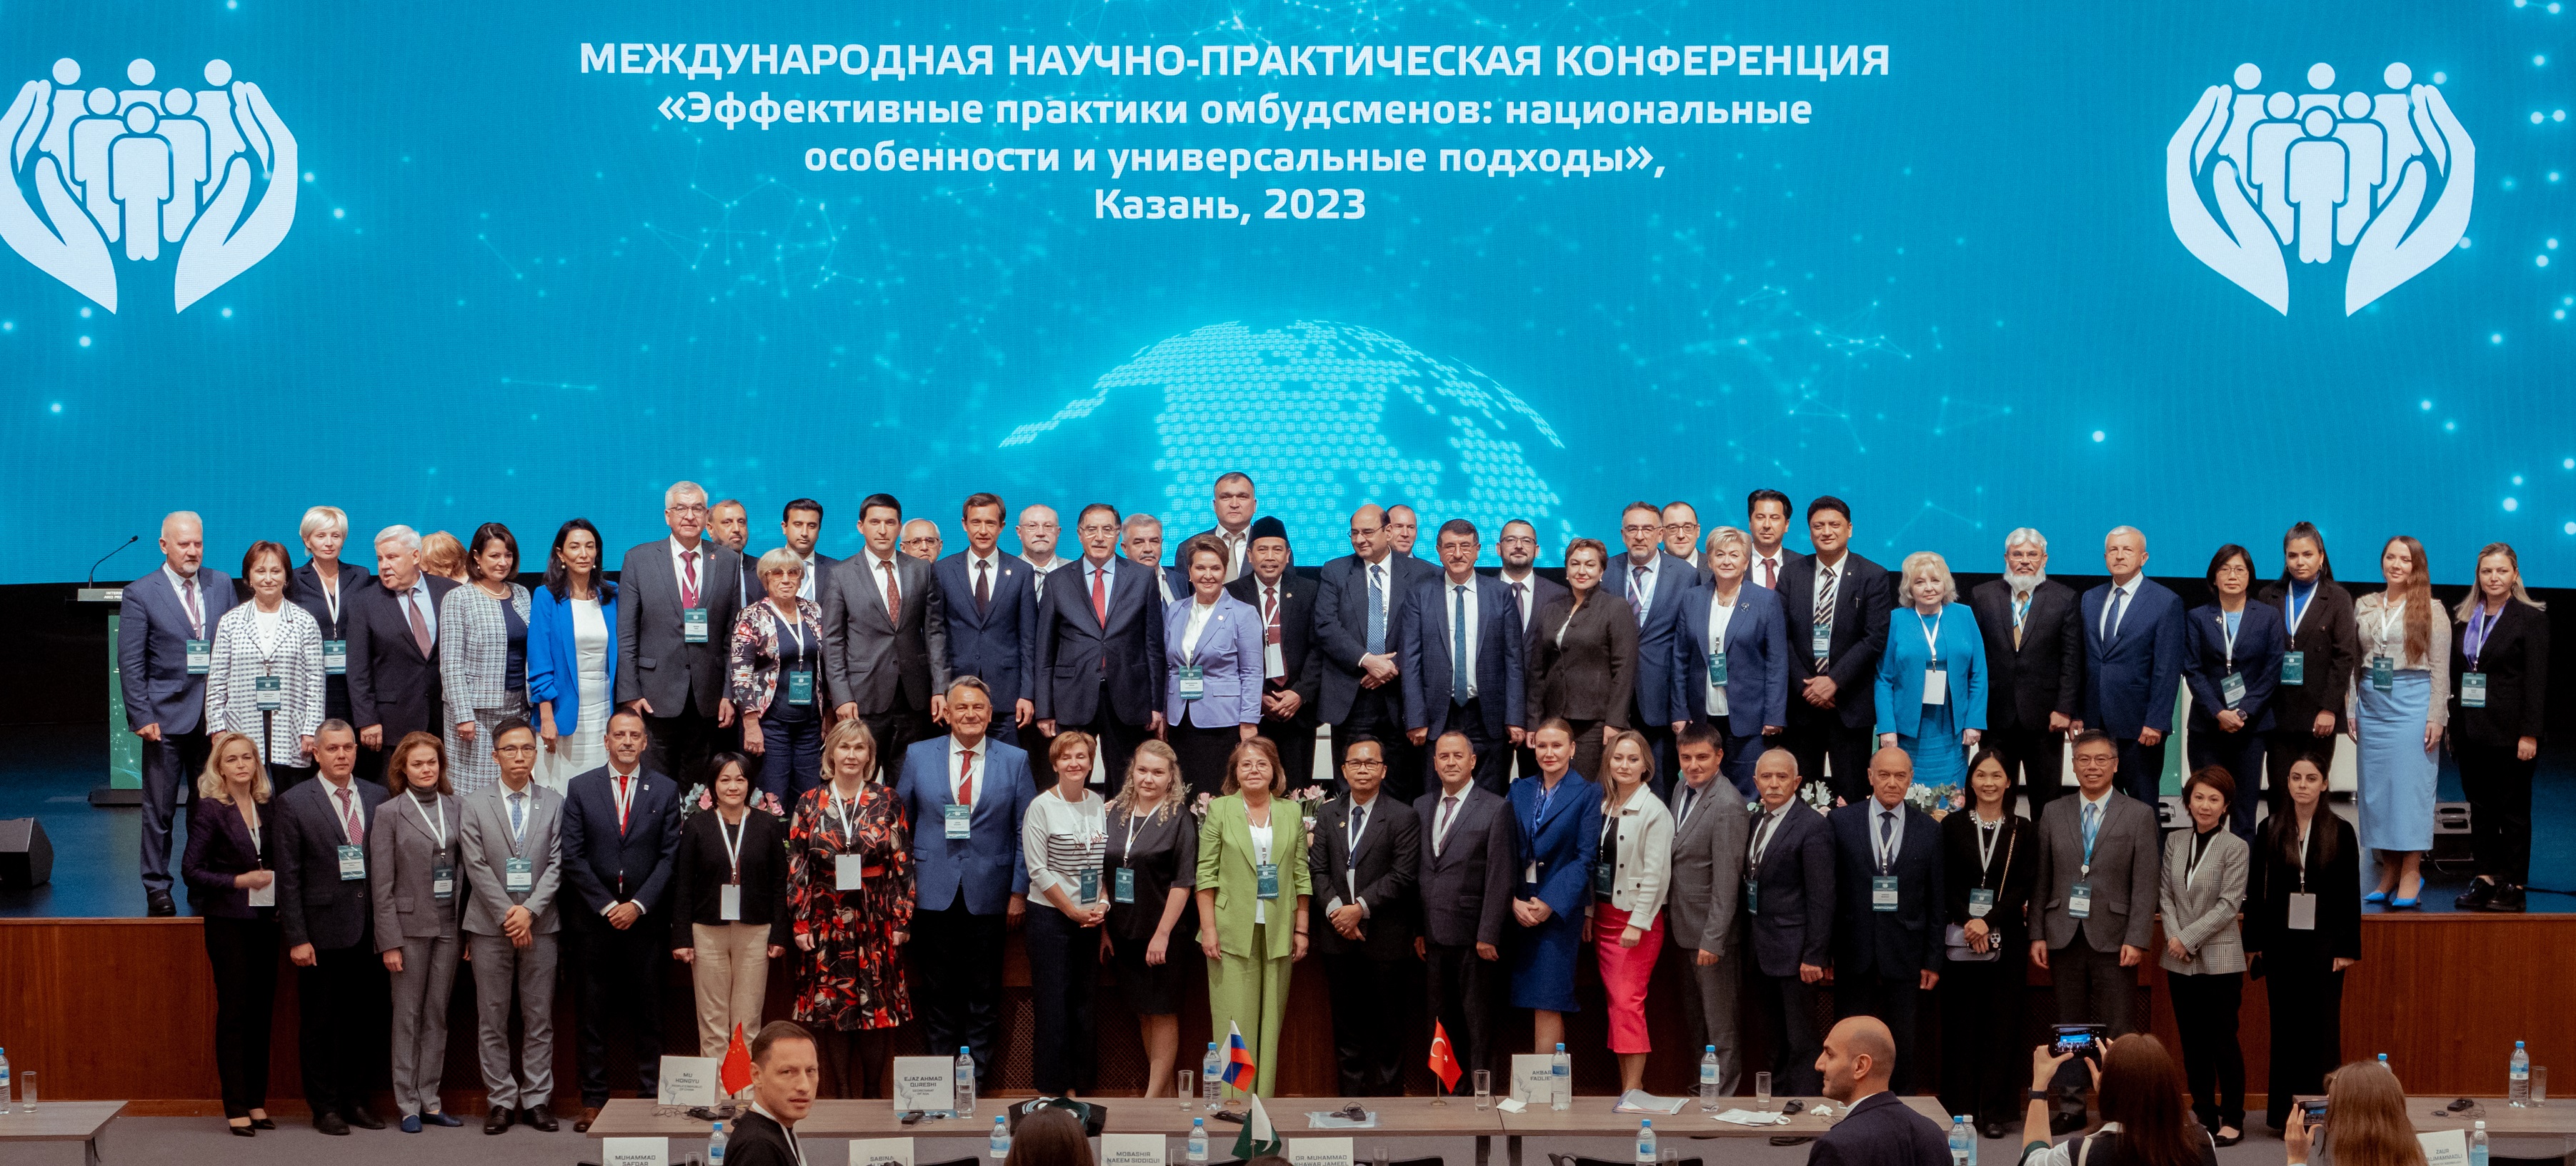 24th Annual Meeting of the AOA Board of Directors, 17th Meeting of the General Assembly and the International Scientific and Practical Conference held on 11-13 September 2023 at Kazan (Republic of Tatarstan)